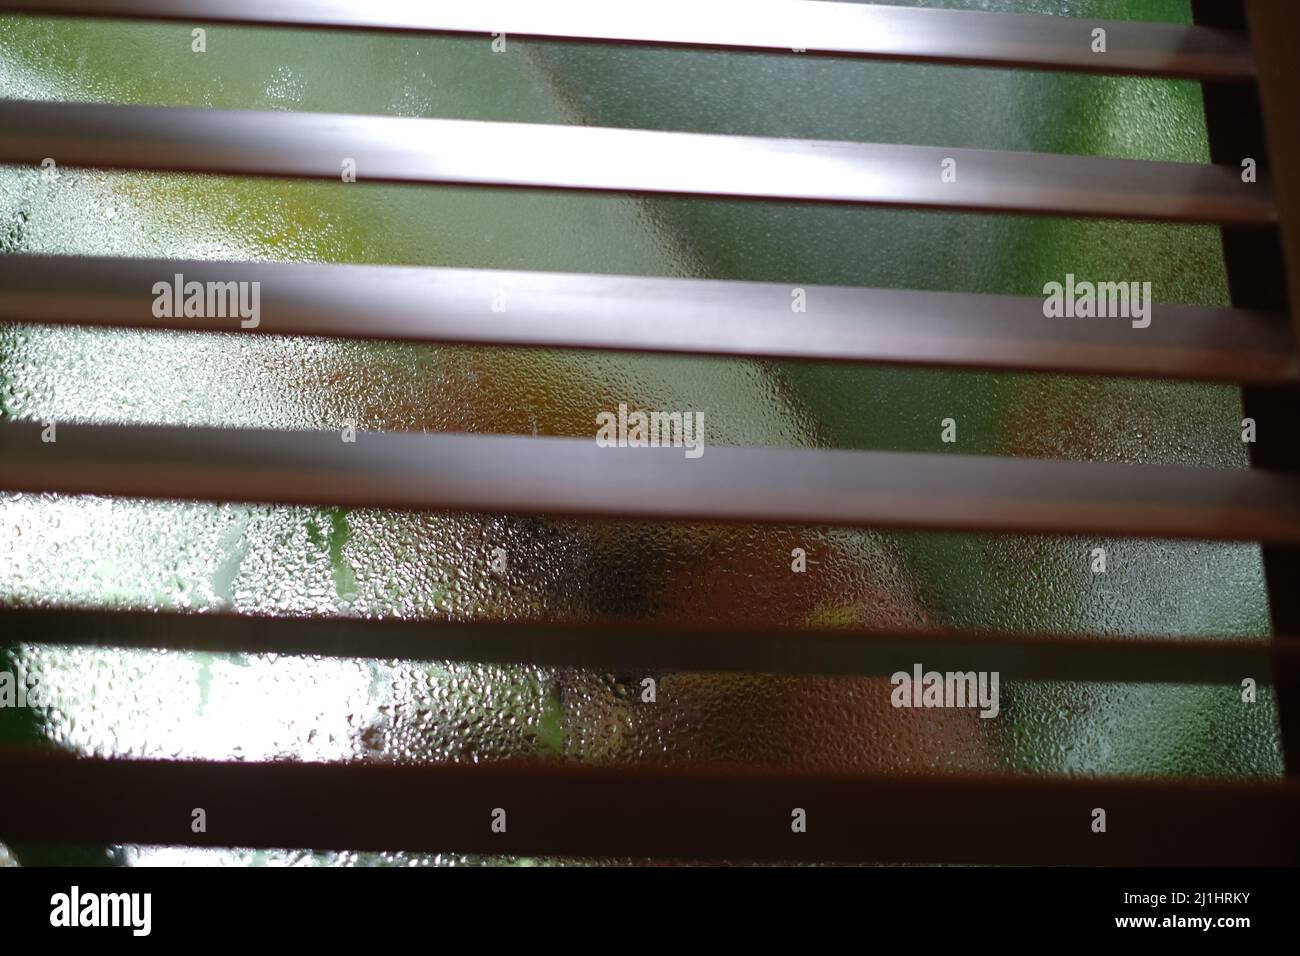 Half-closed wooden blinds with colorful fogged up window behind Stock Photo